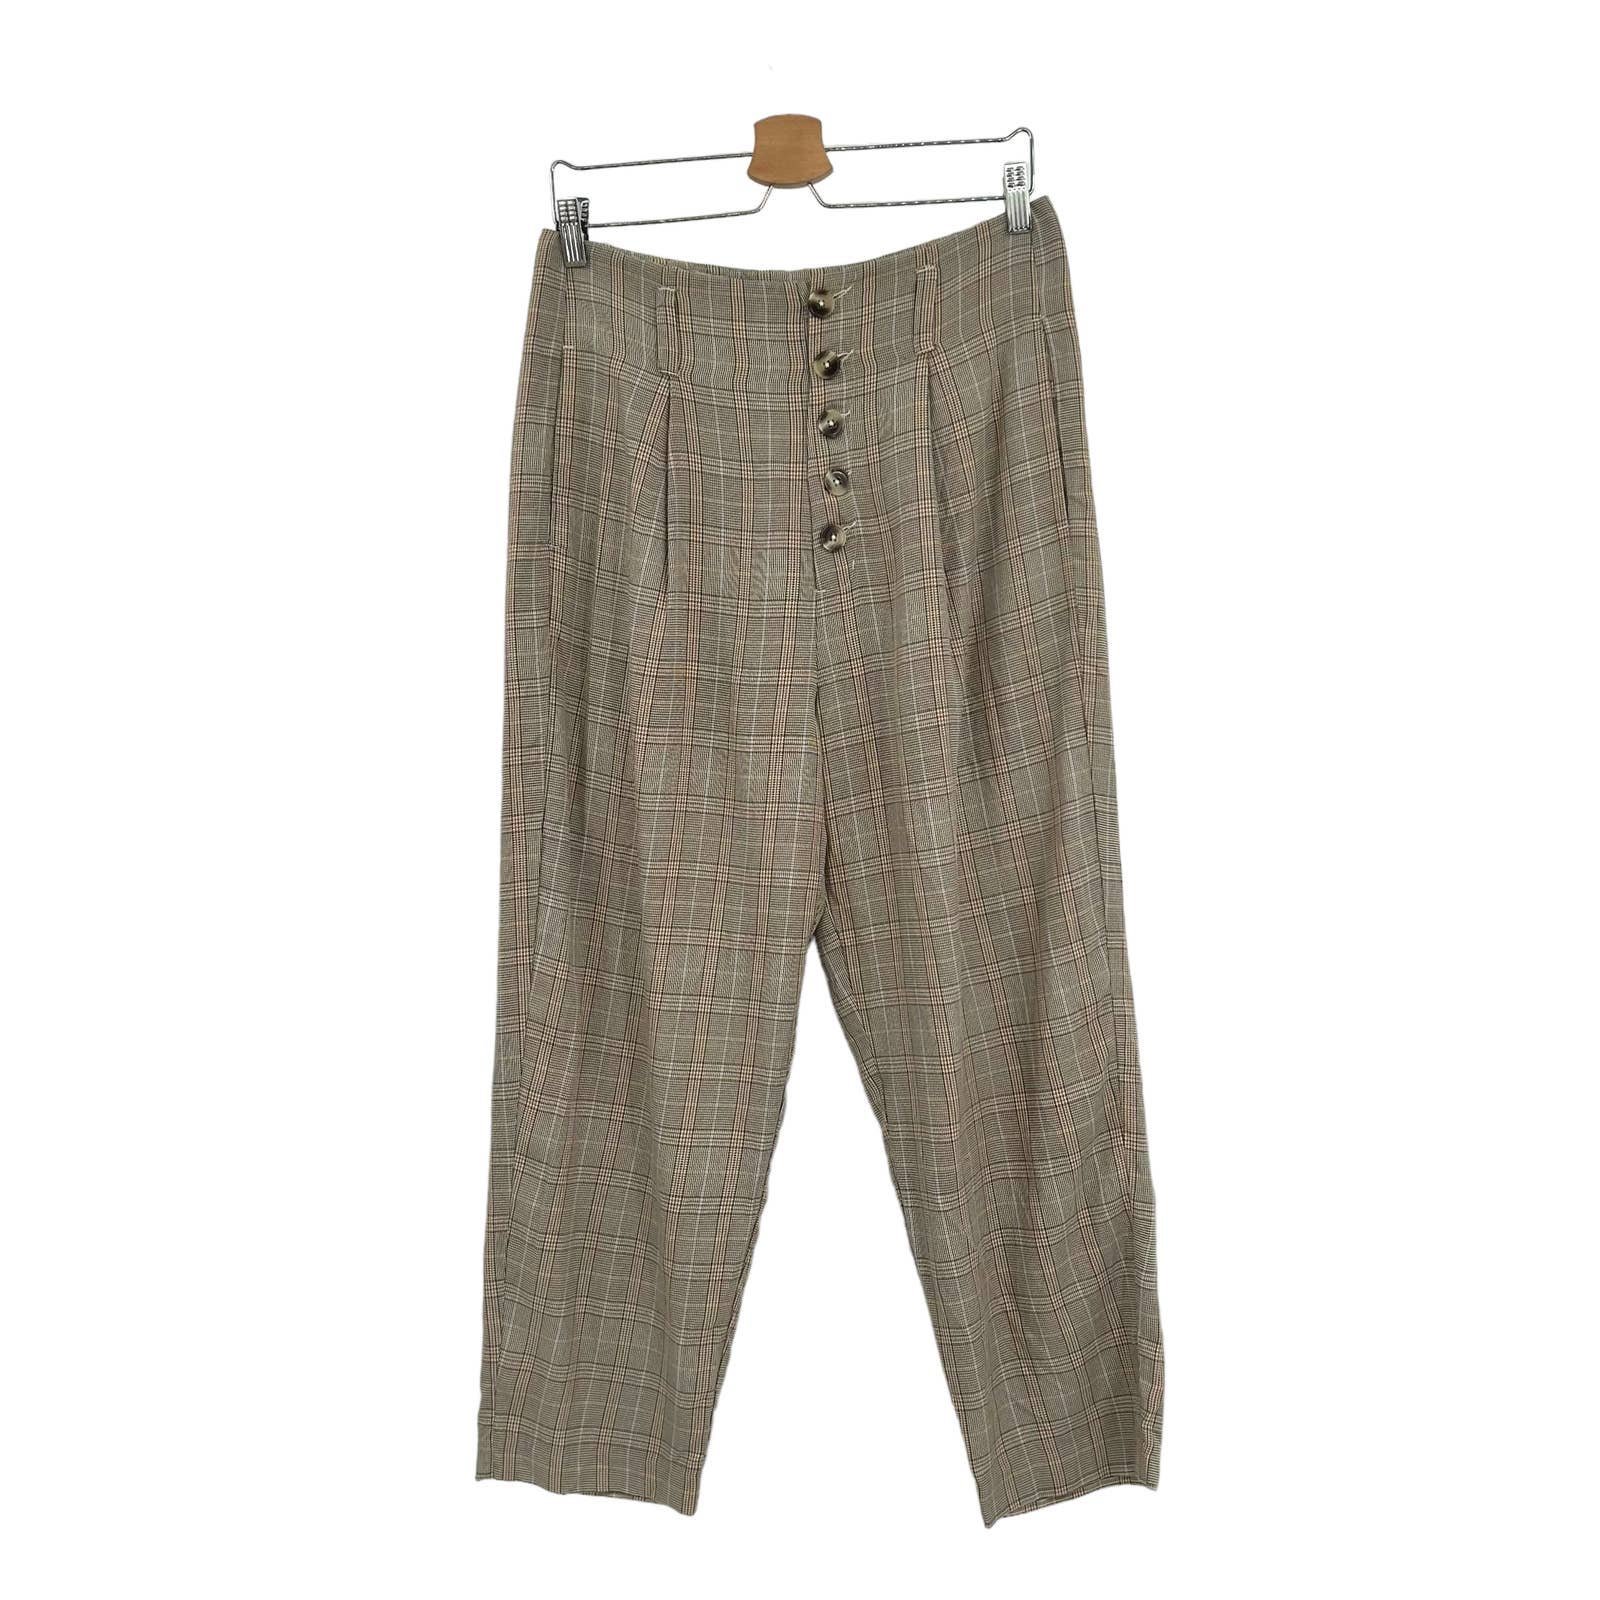 Classic Frank And Oak Alice Straight Plaid Trousers Pan